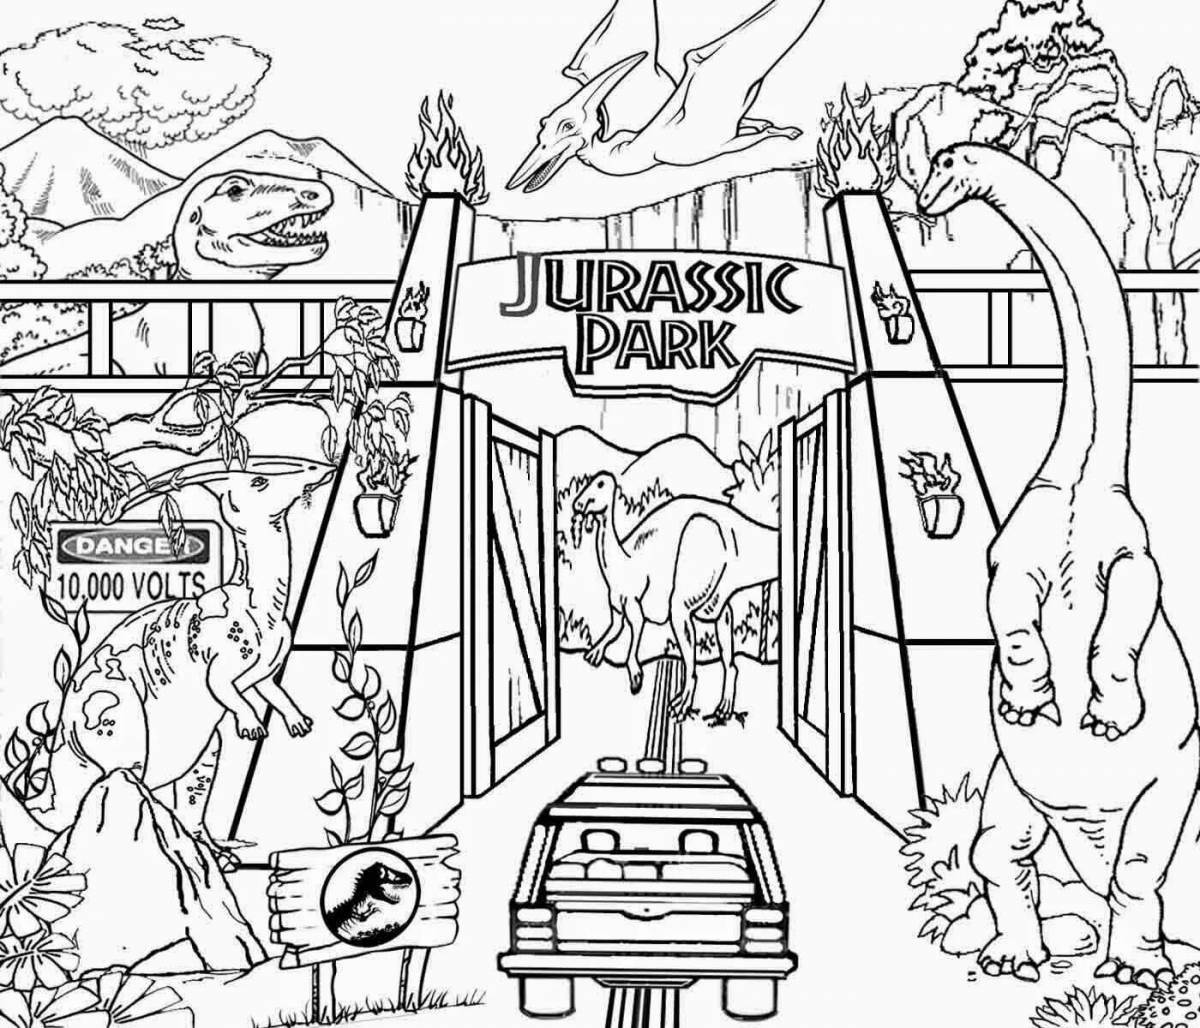 Cute lego dinosaurs jurassic world coloring page